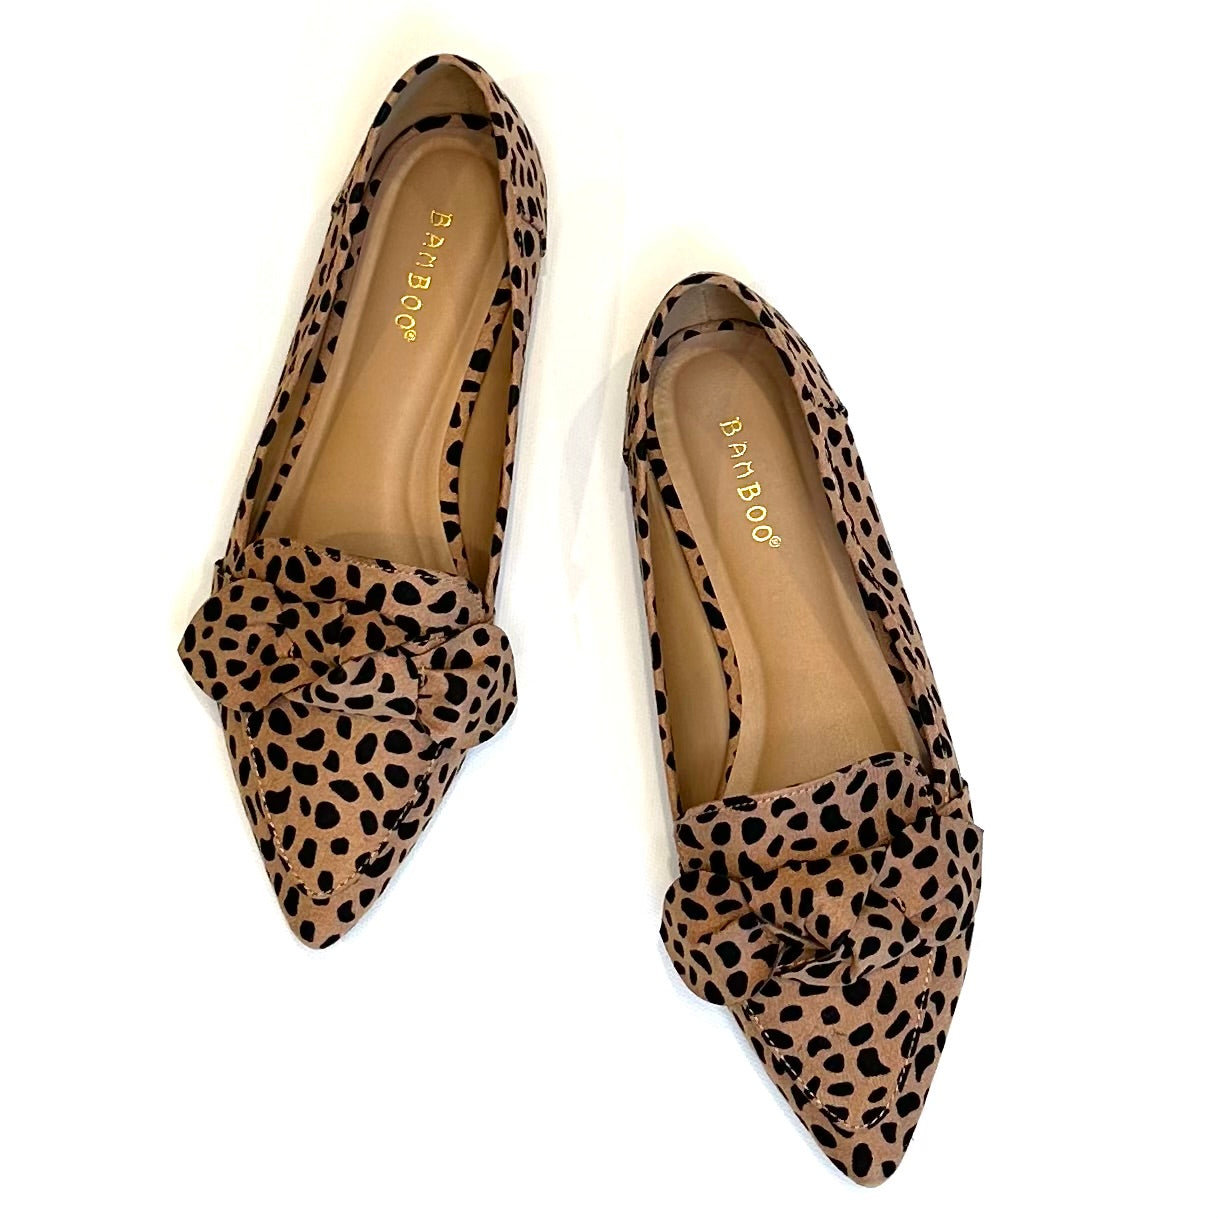 Ballet Flats With Bow in Leopard - Warehouse Sale Item!